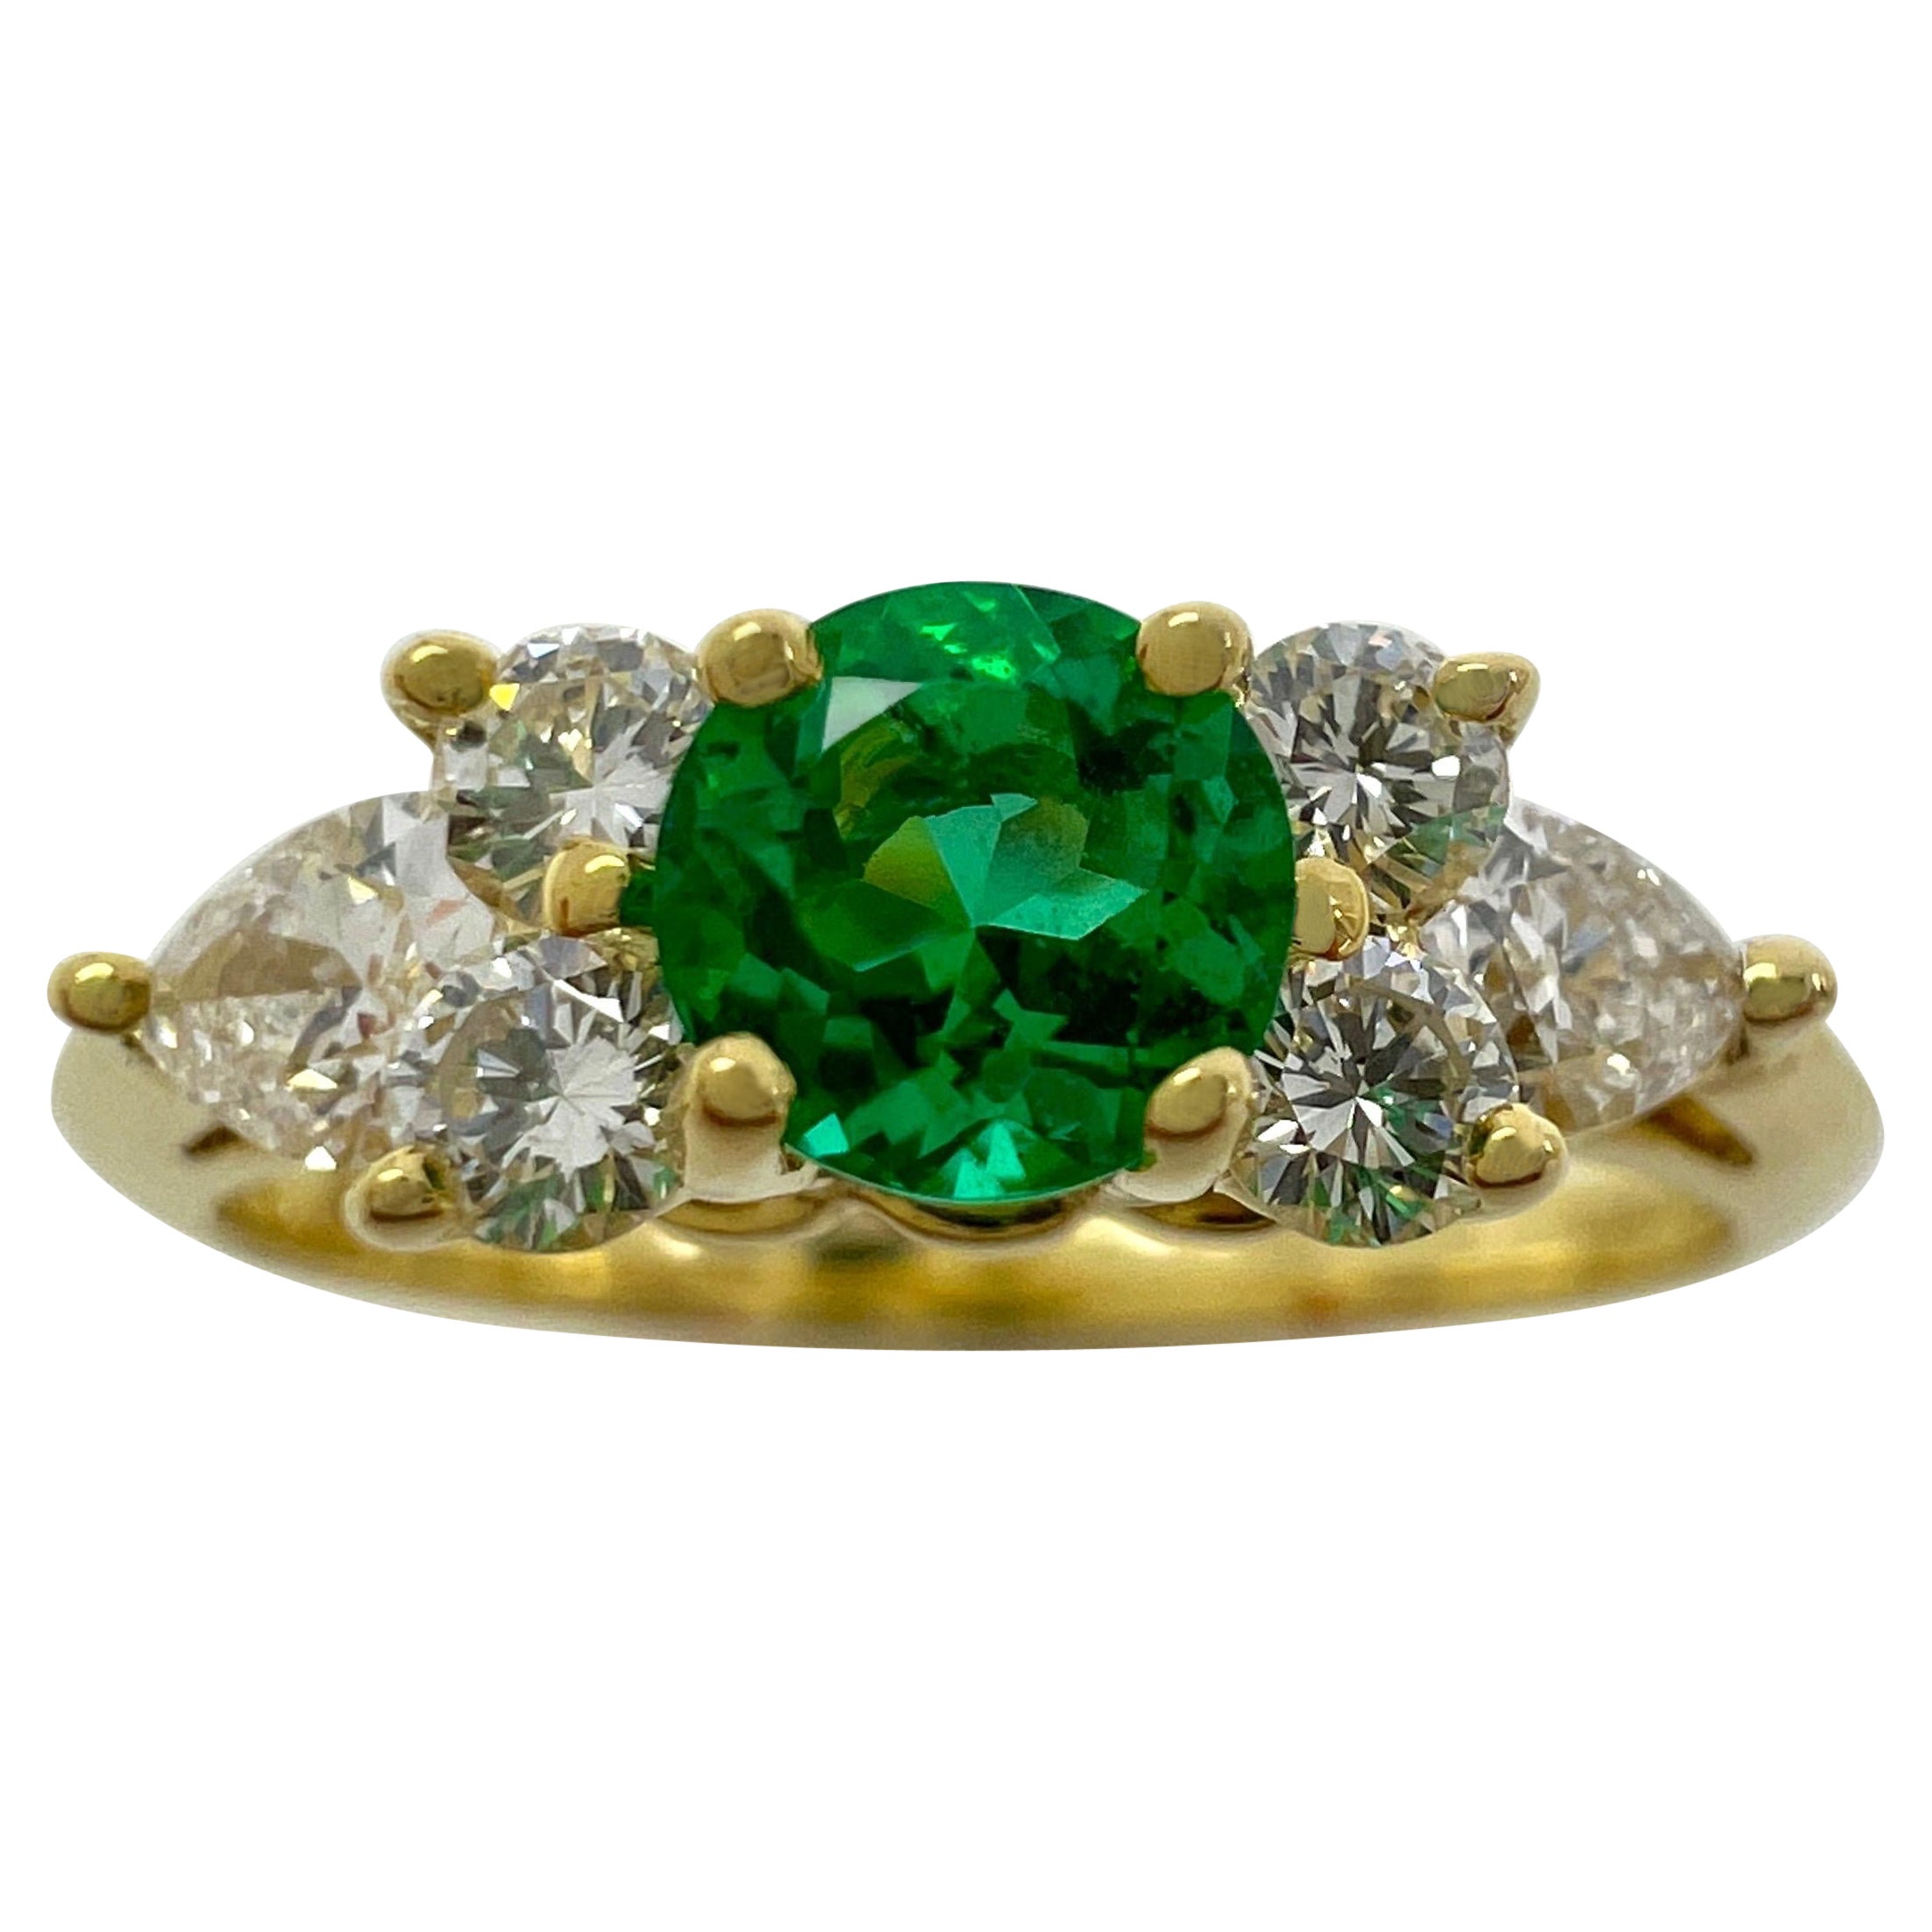 Colorful Engagement Rings We Love | Green diamond rings, Green diamond,  Colored engagement rings